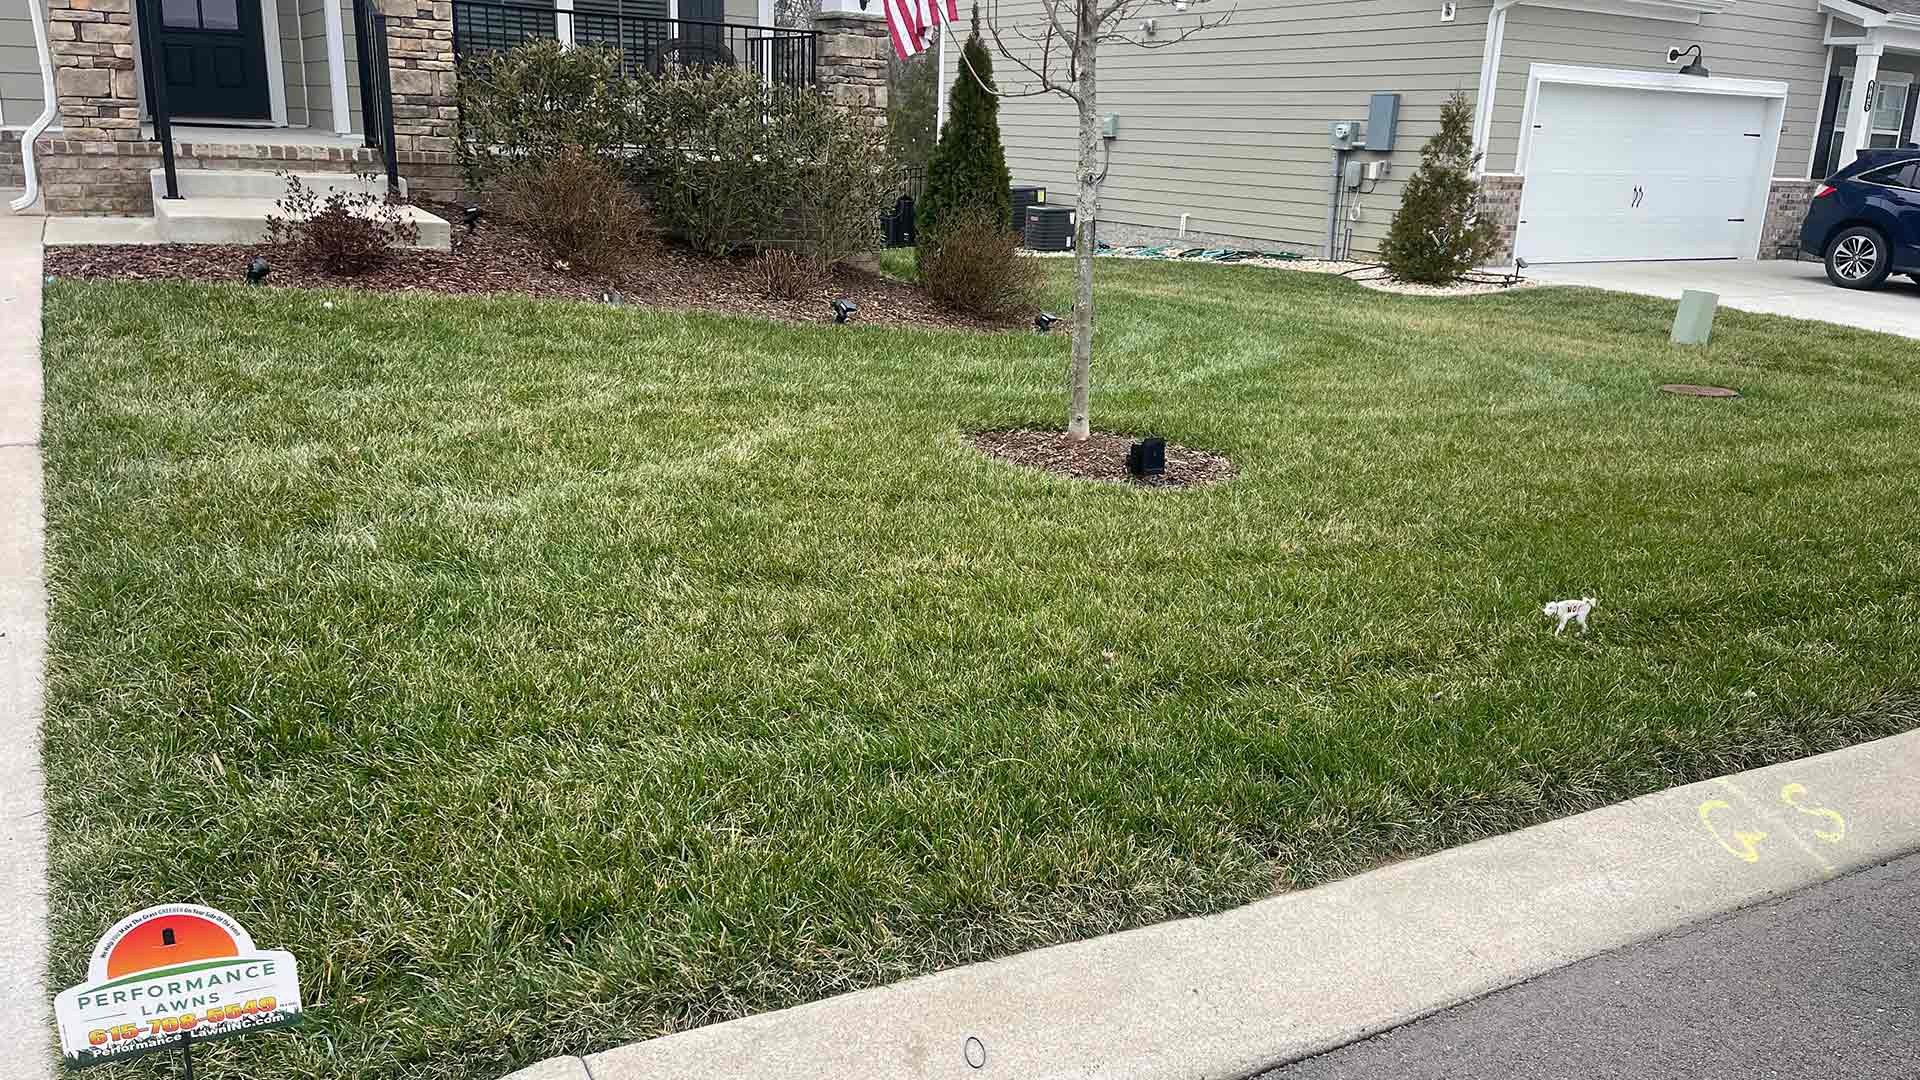 Serviced lawn by Performance Lawns Inc. in Brentwood, TN.